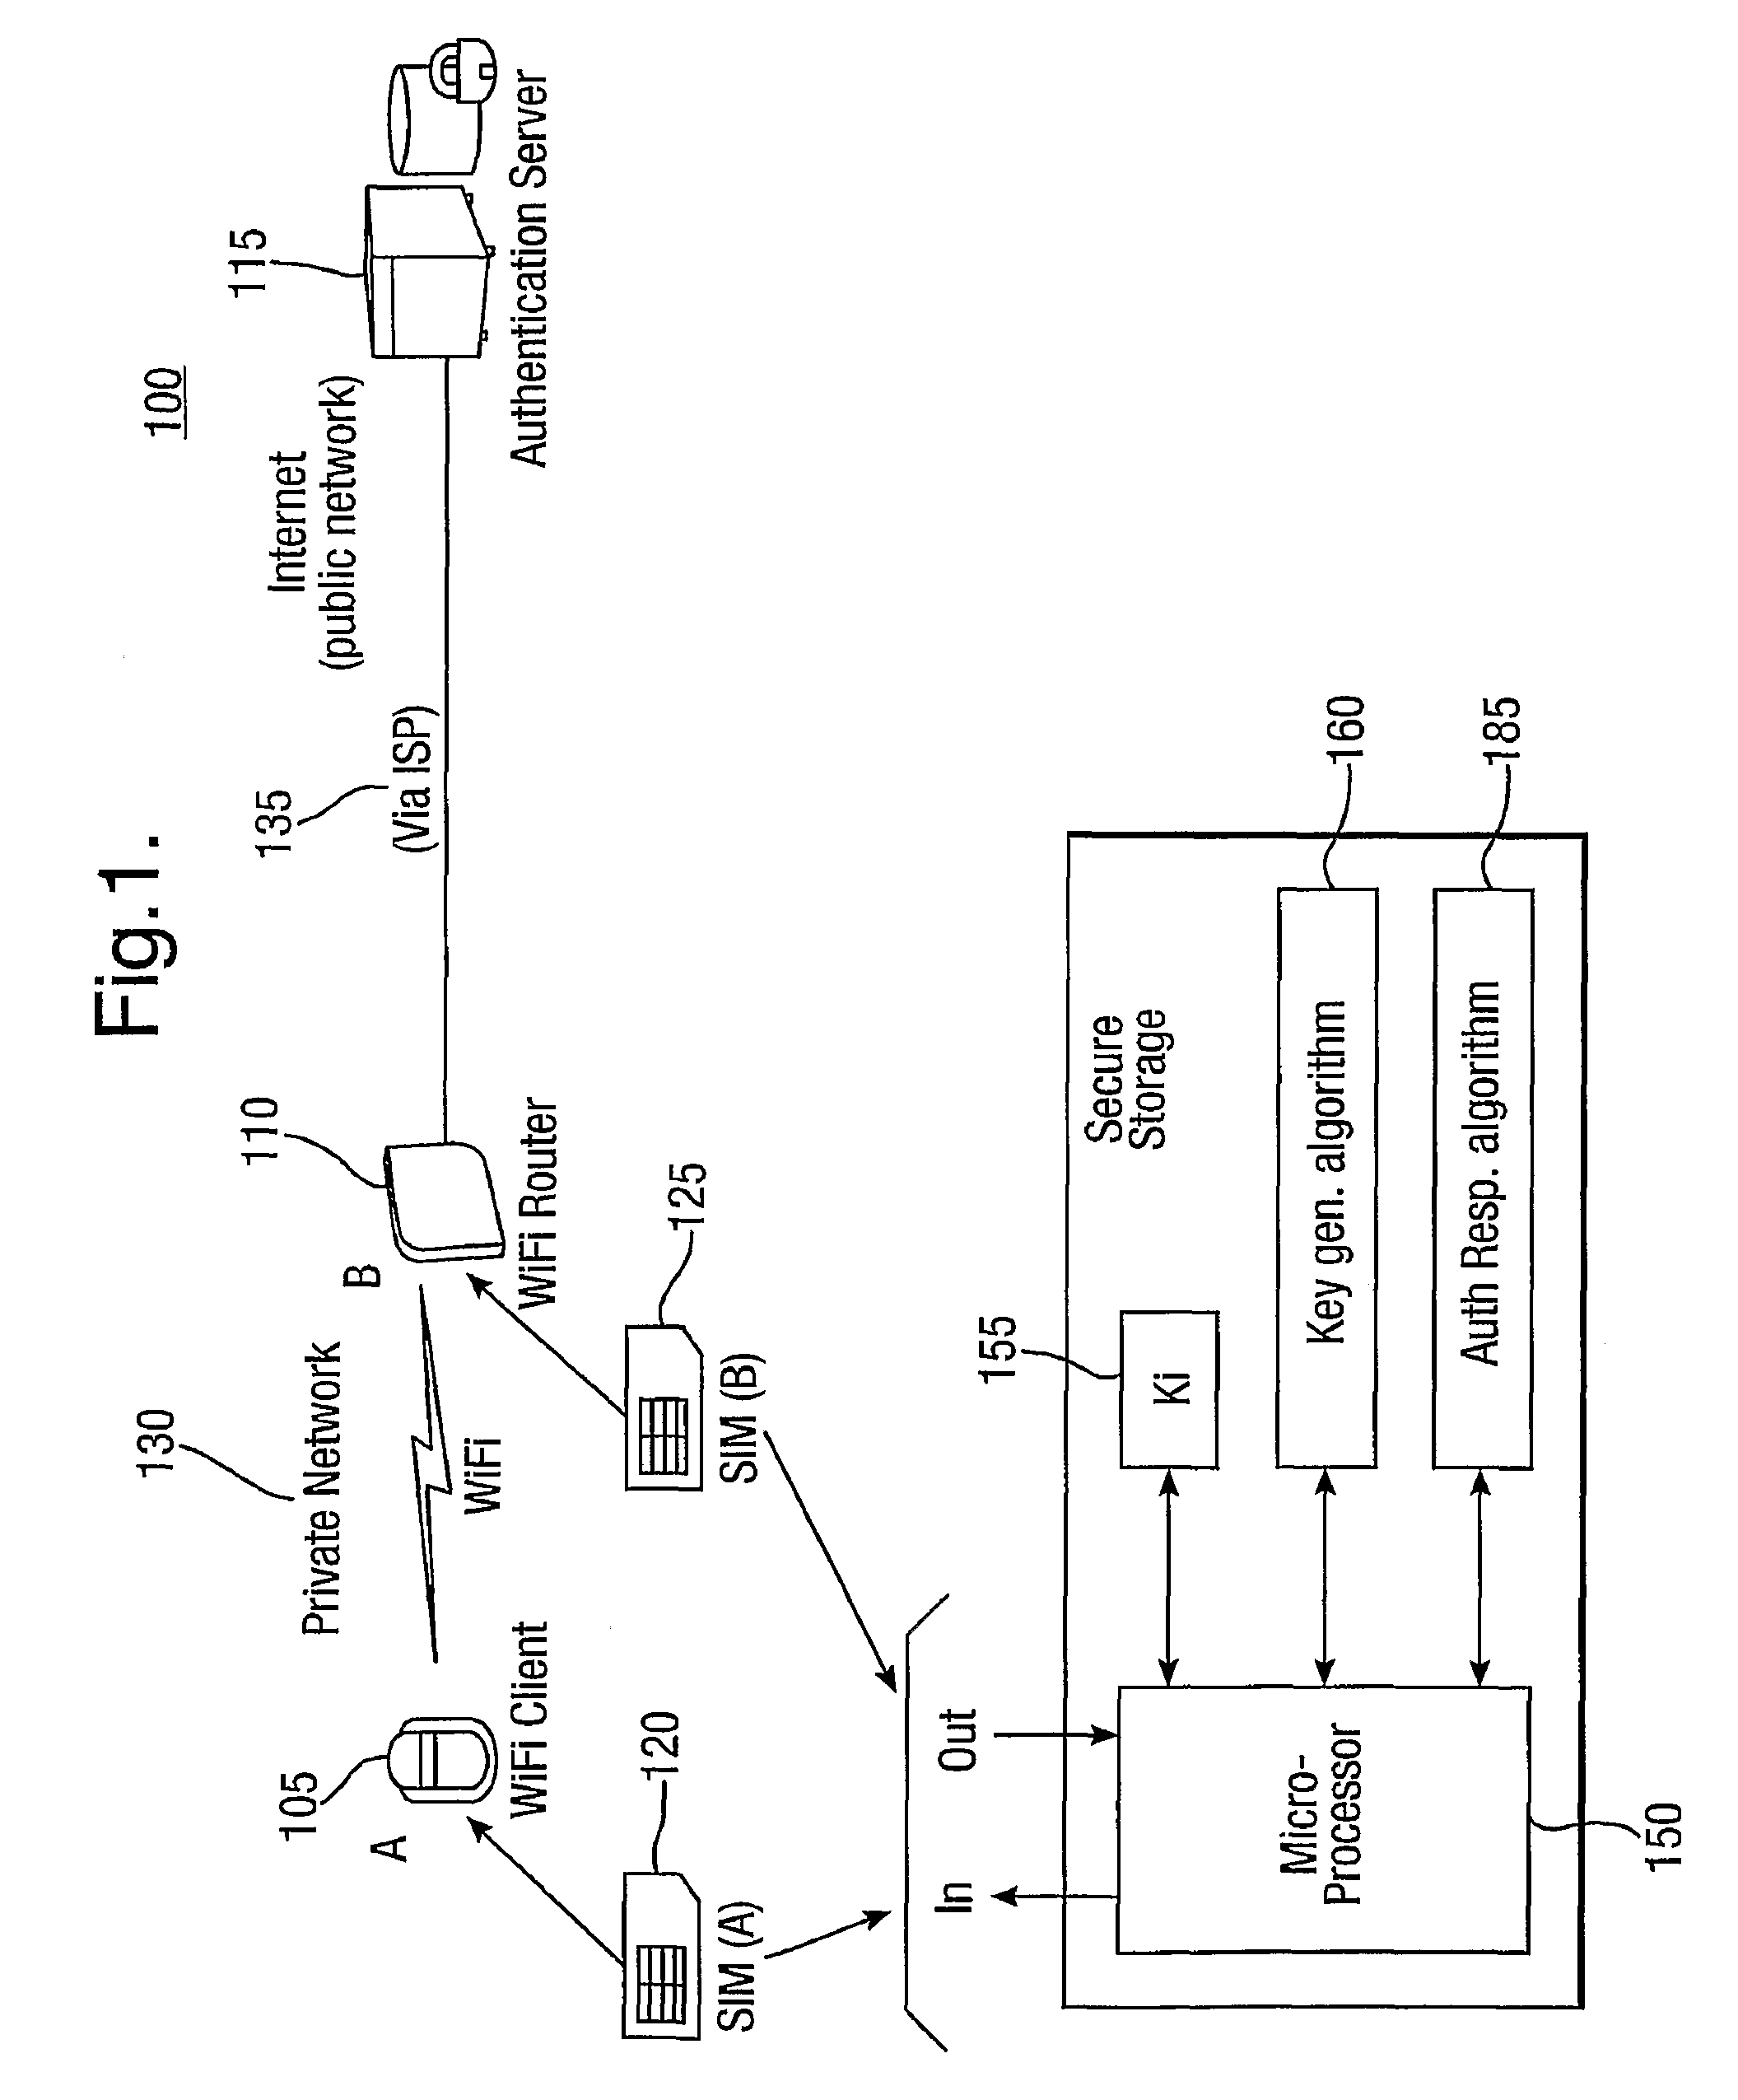 Provision of secure communications connection using third party authentication